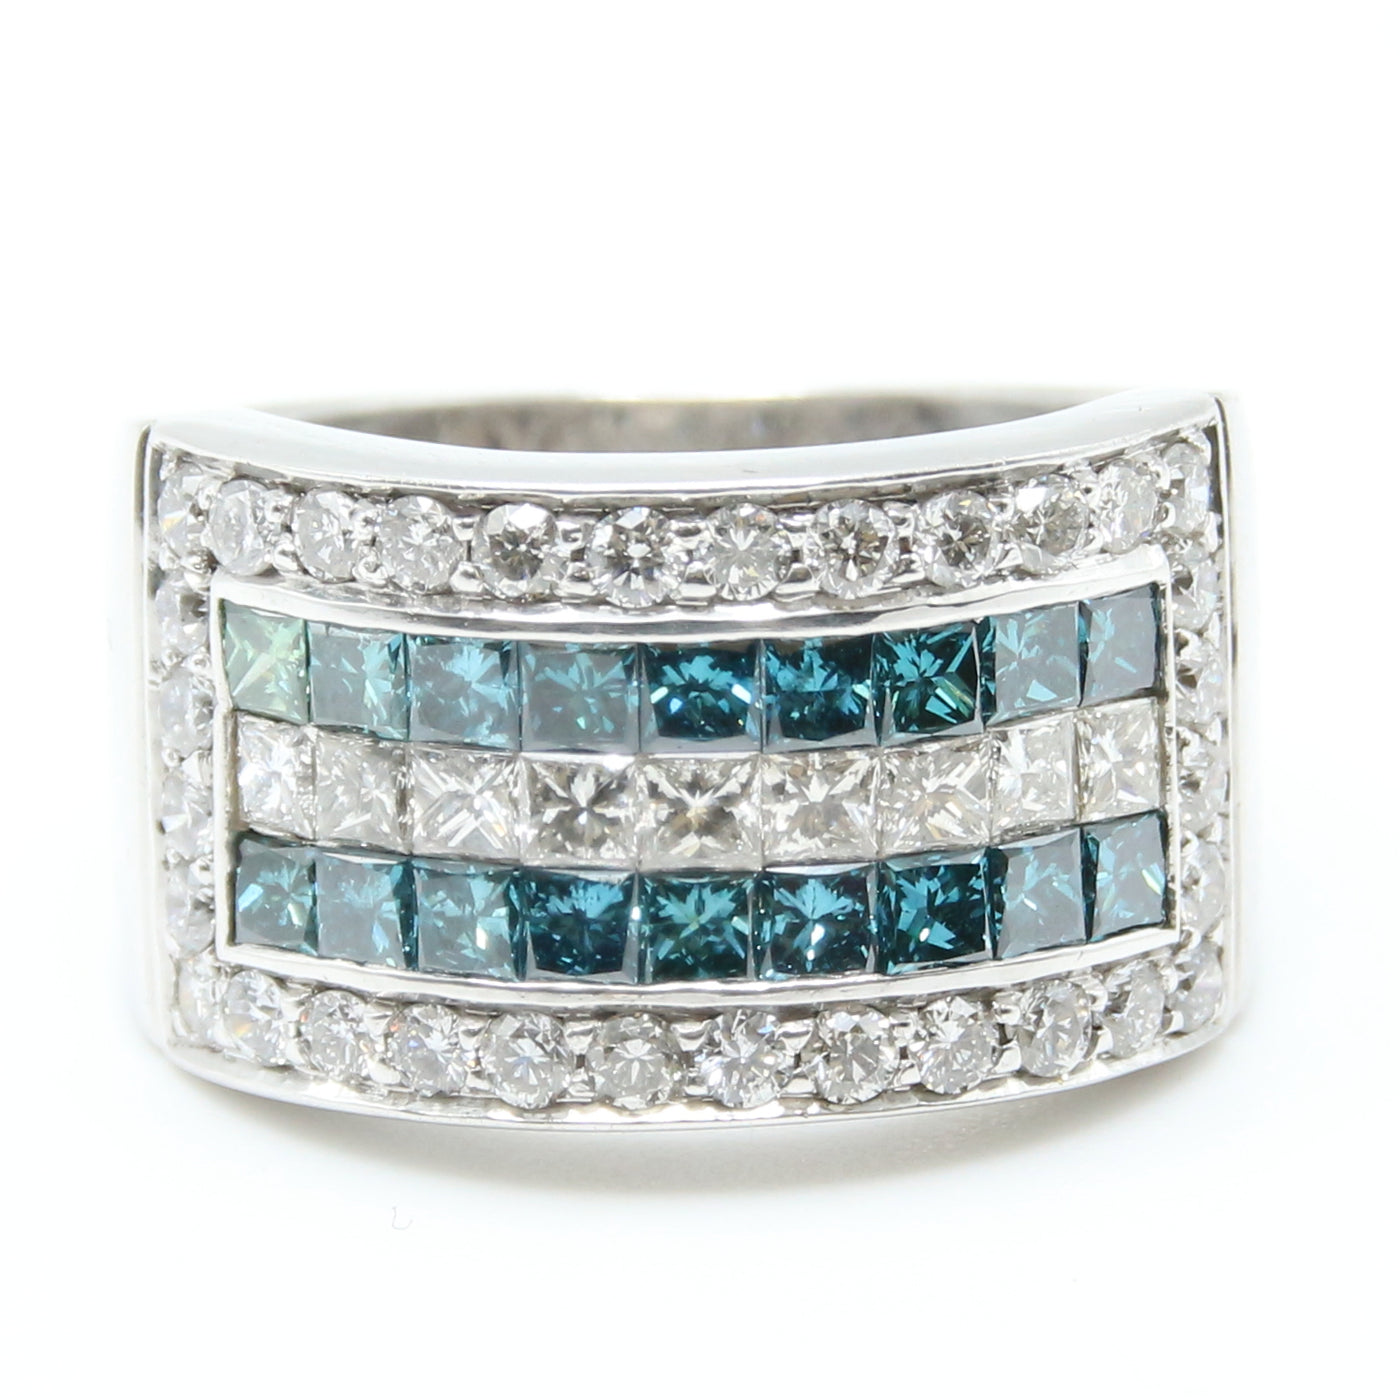 Blue and White Diamond Ring